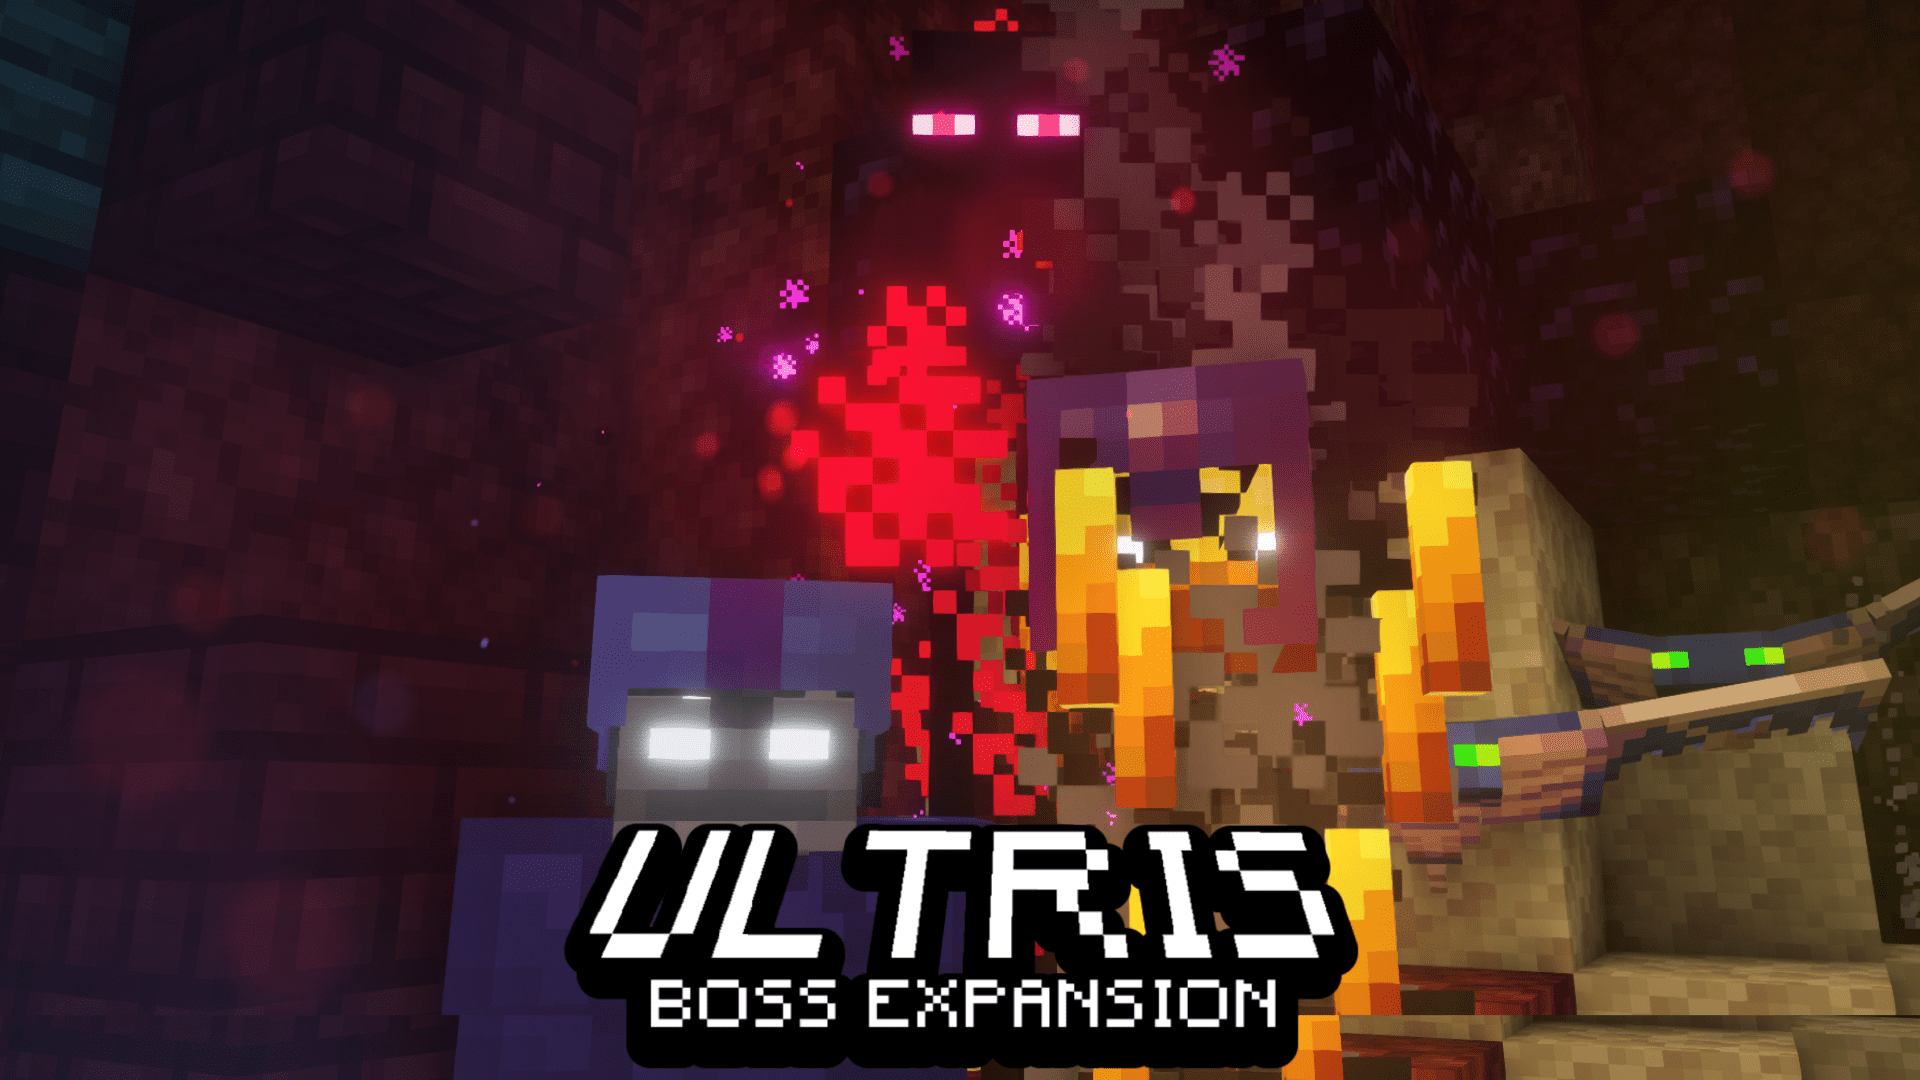 Boss expansion